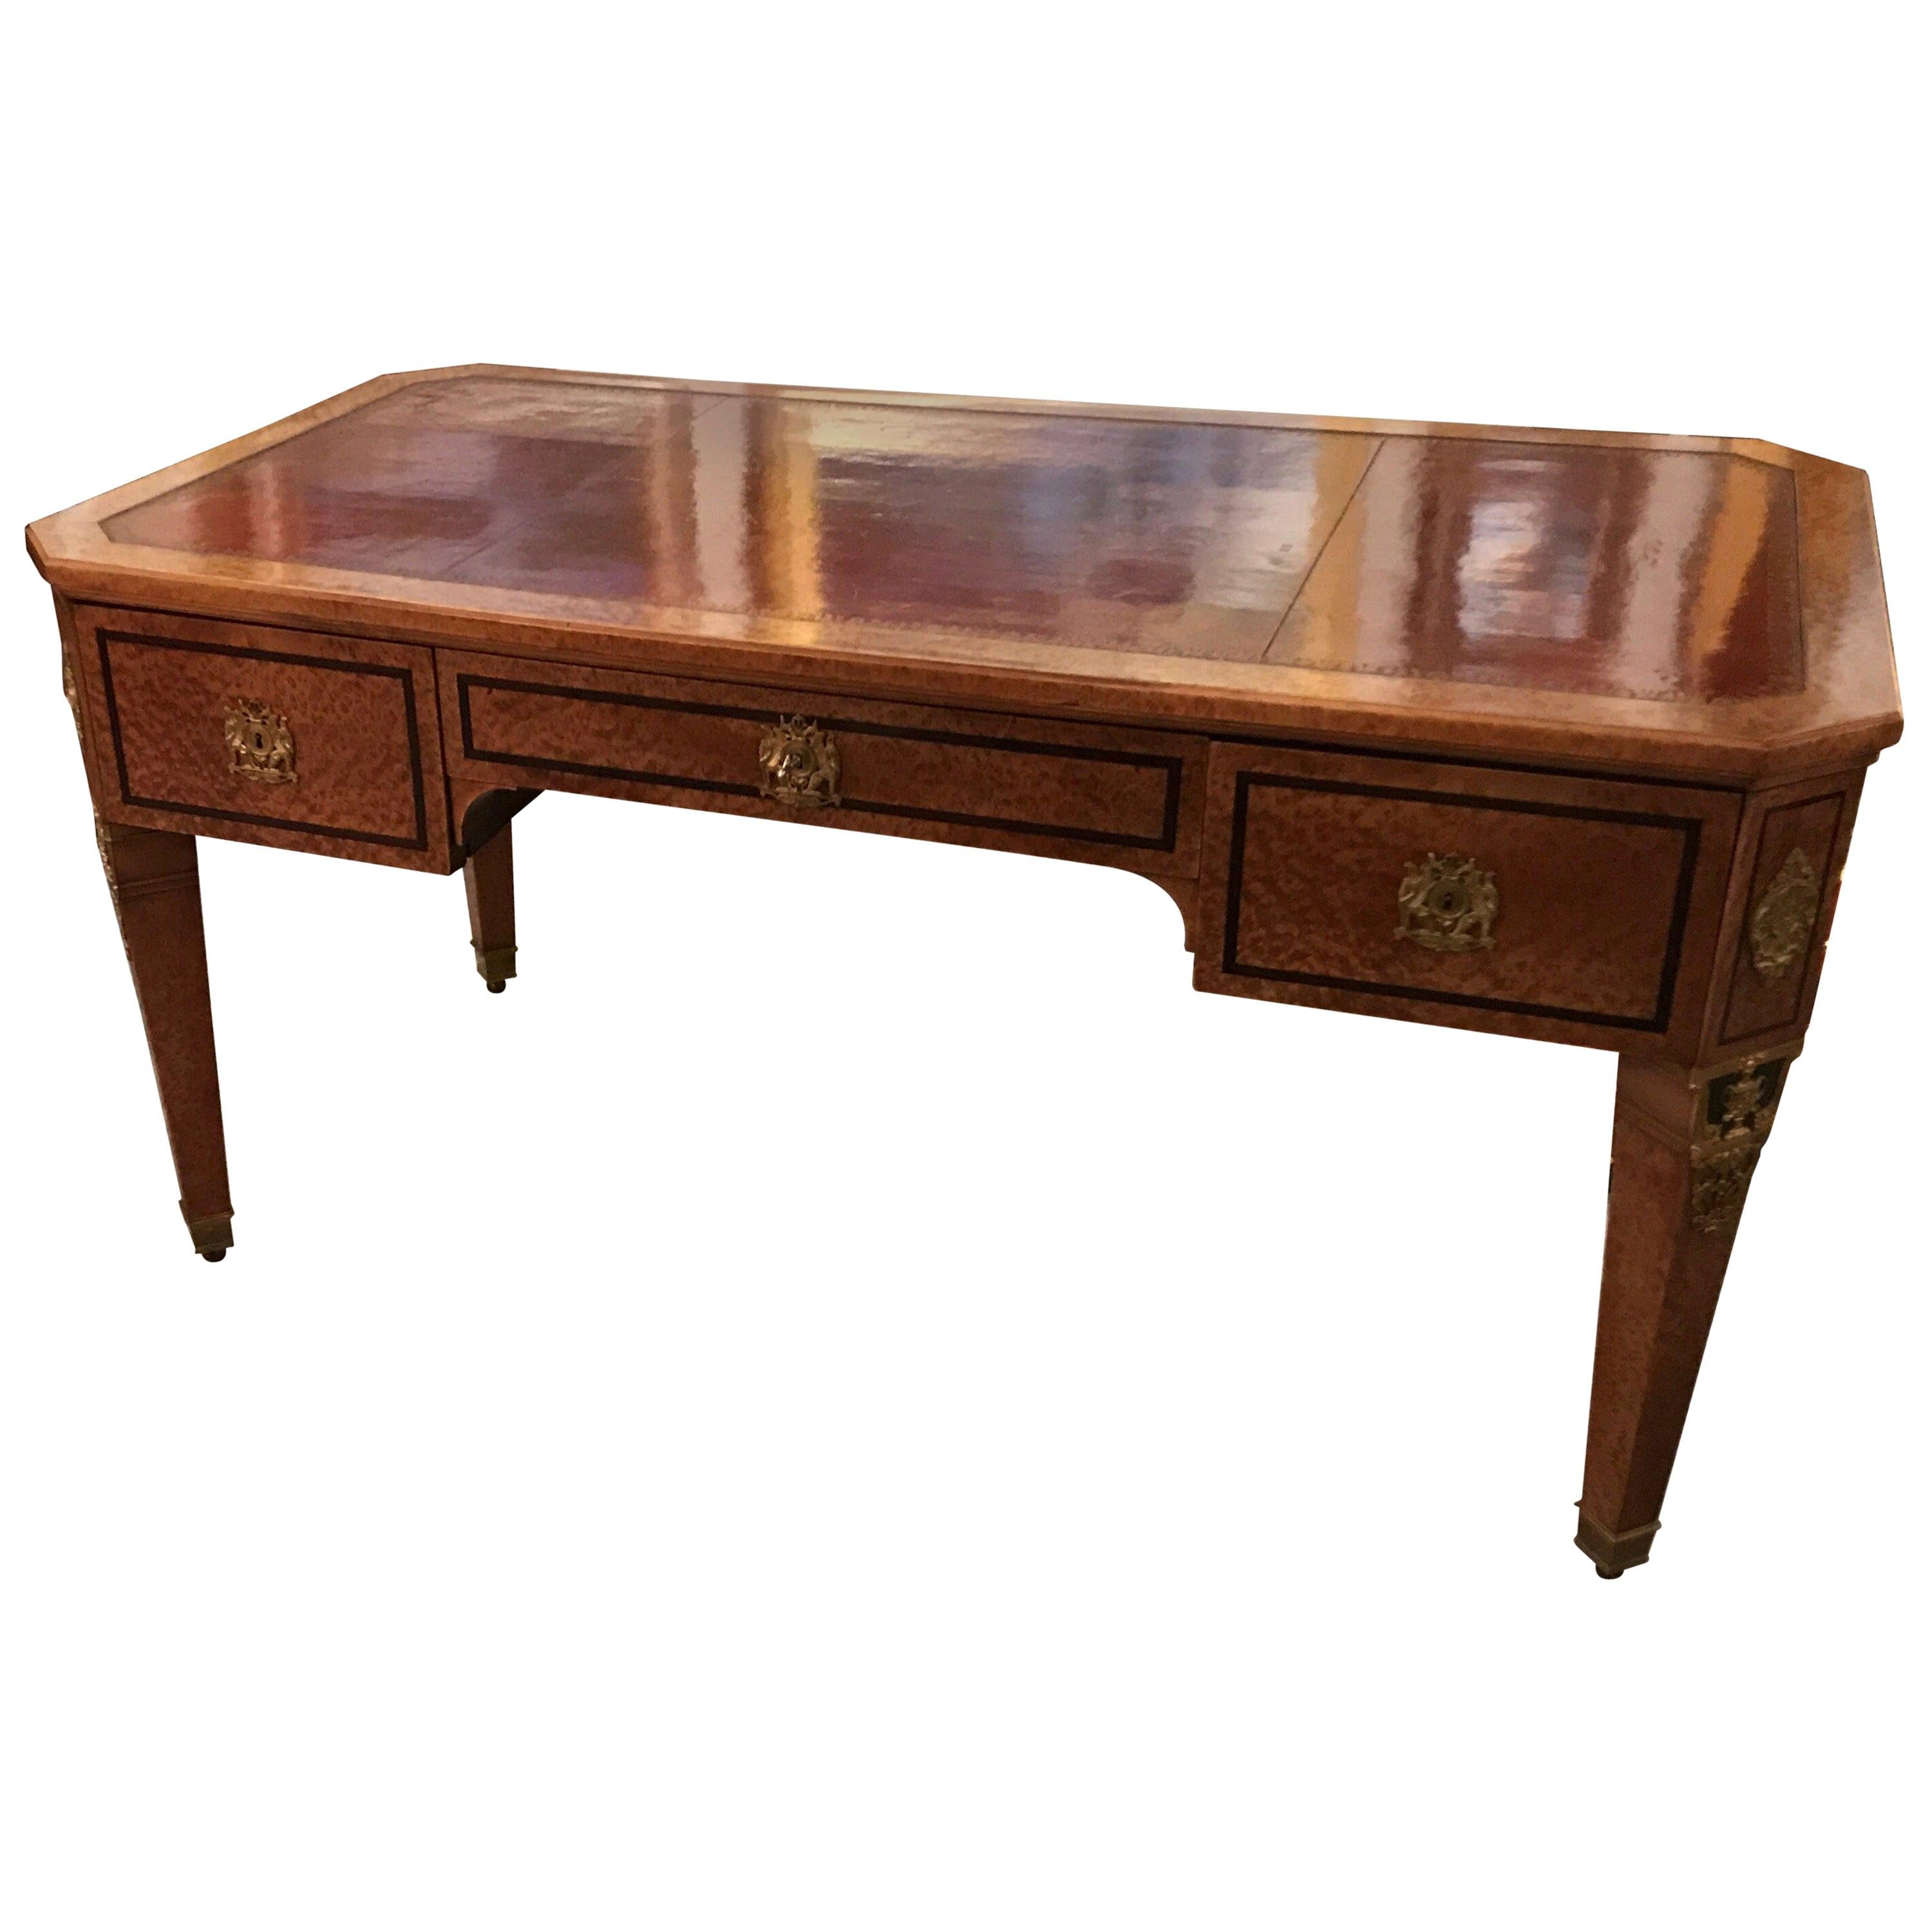 Large Neoclassical Bird's-Eye Maple Leather Top Desk